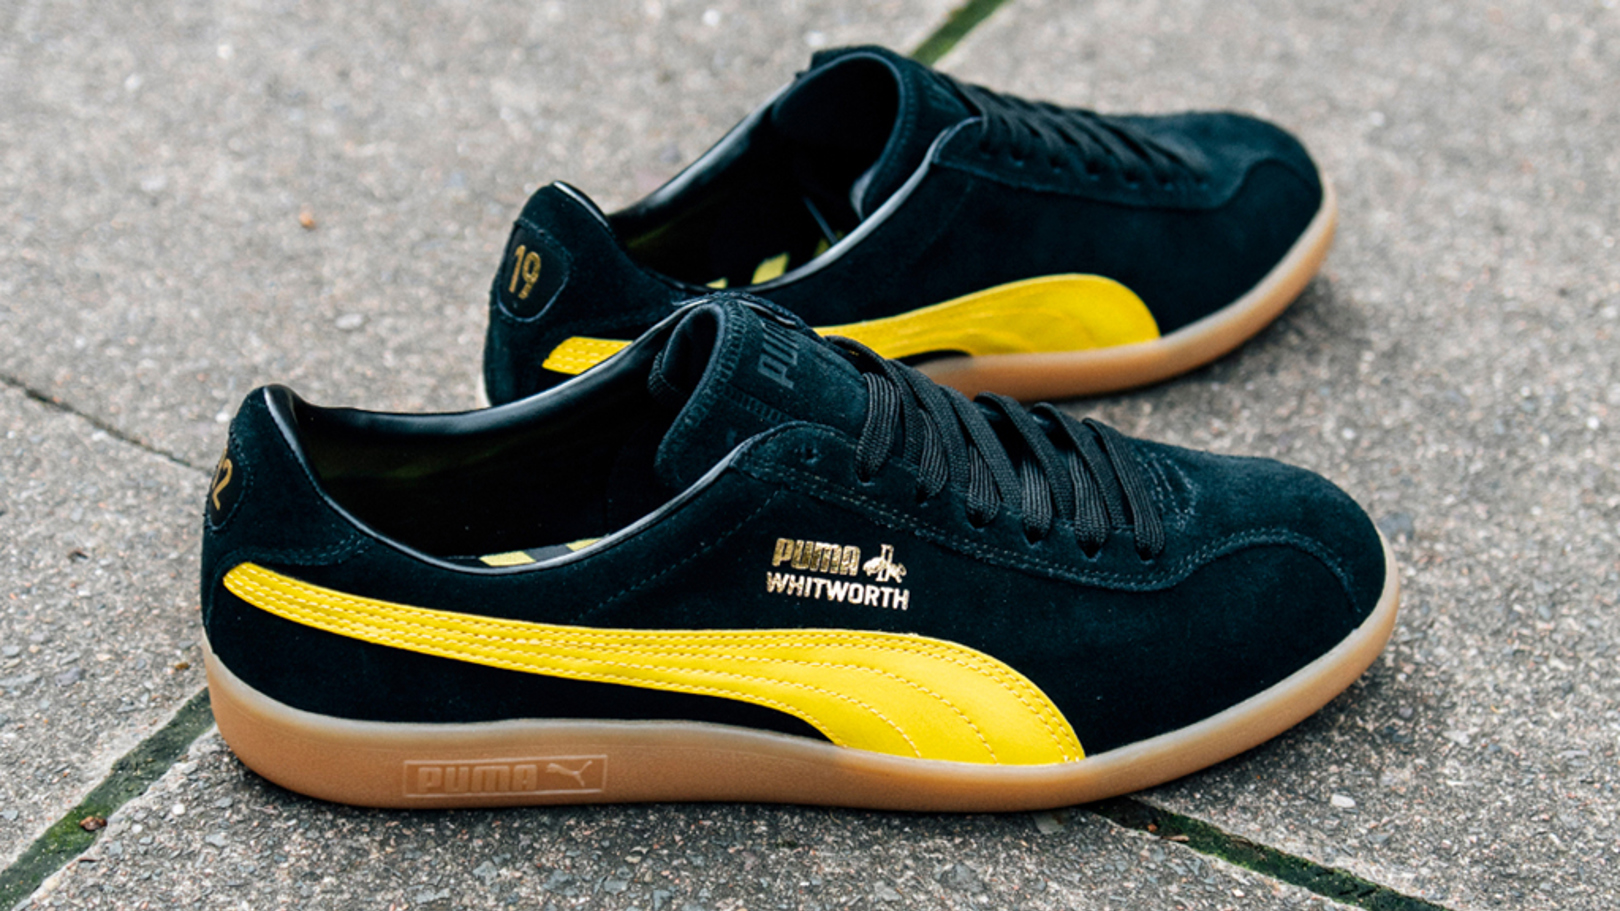 City and PUMA launch 125th anniversary trainers